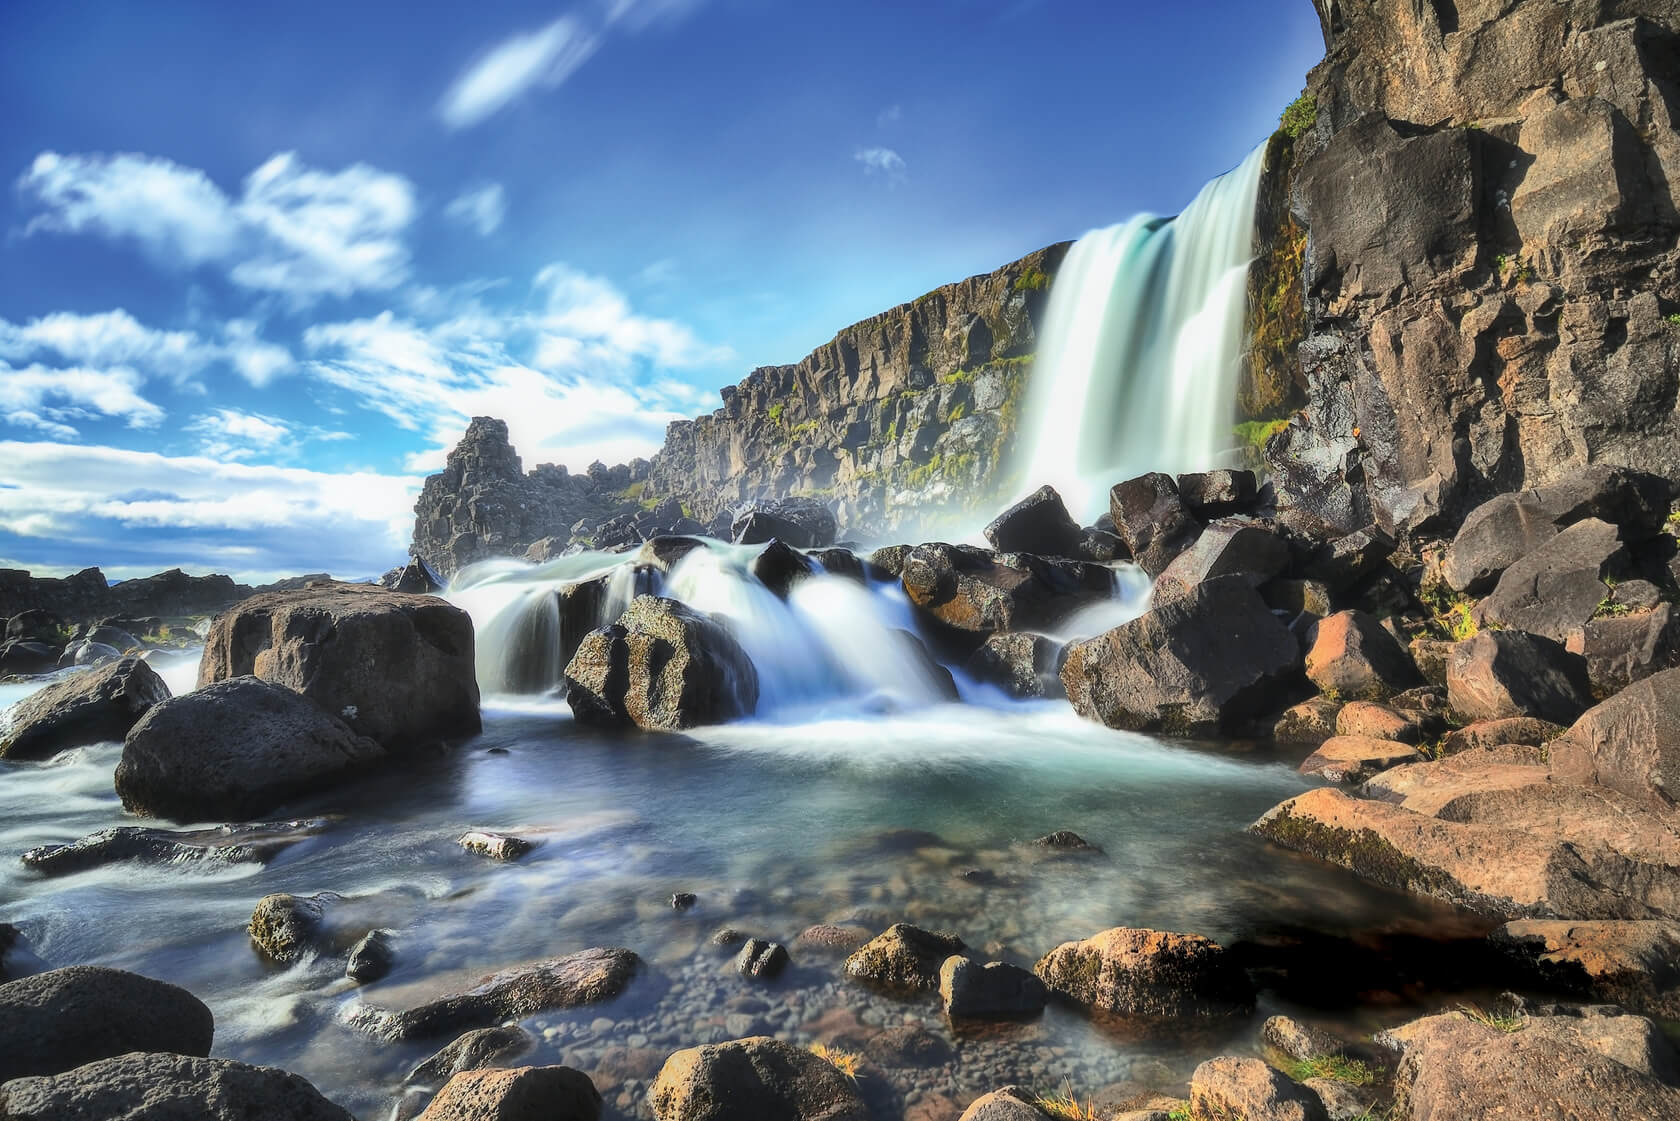 Oxararfoss, waterfall, rocks, rock formations, scenic, excursions, northern europe